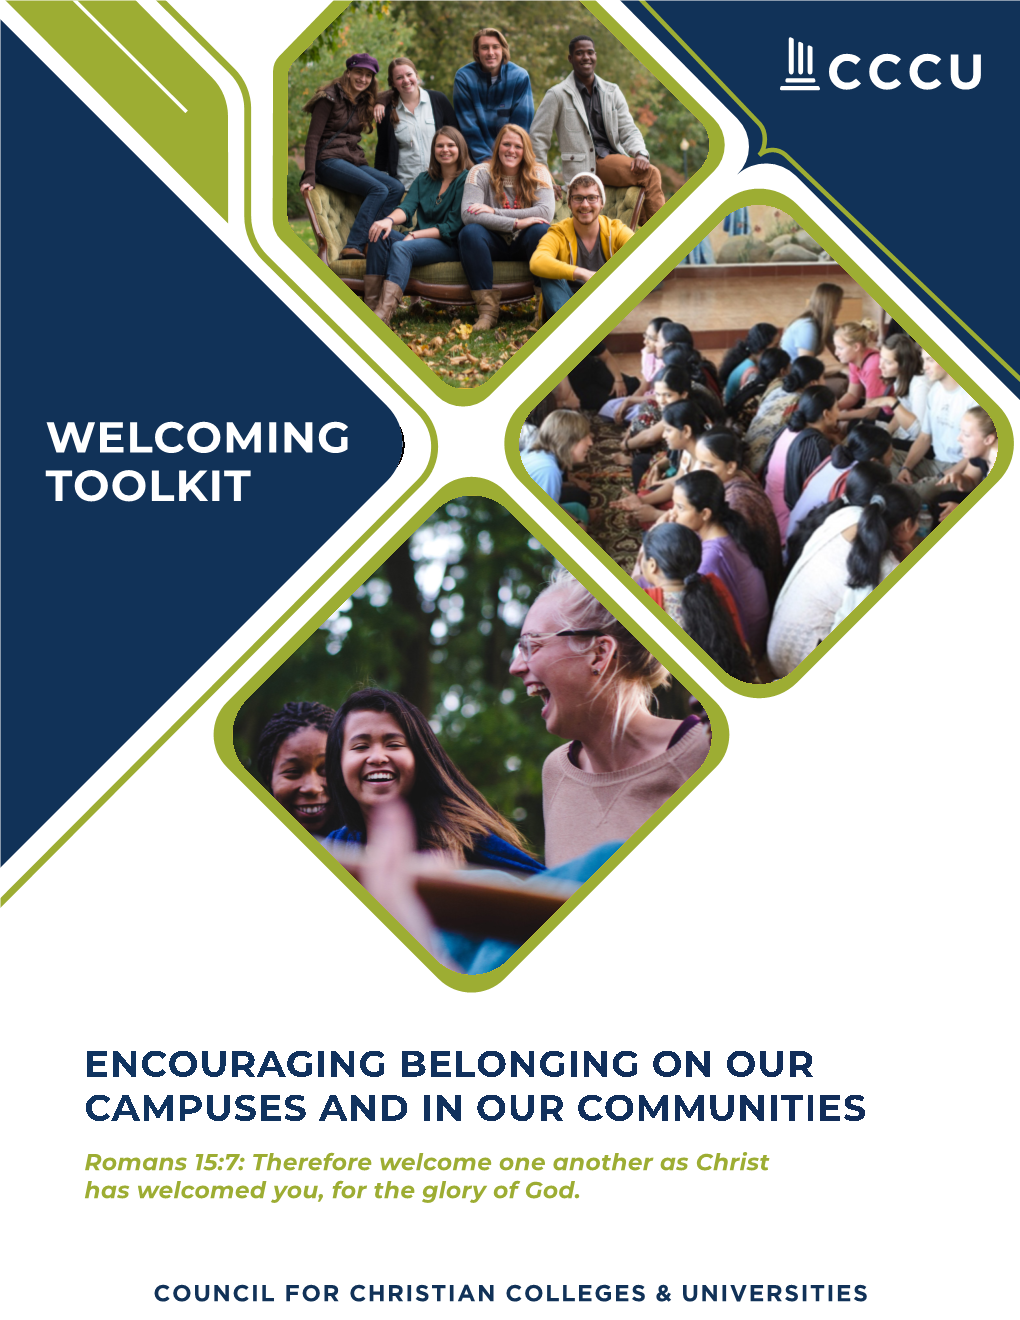 Welcoming Toolkit